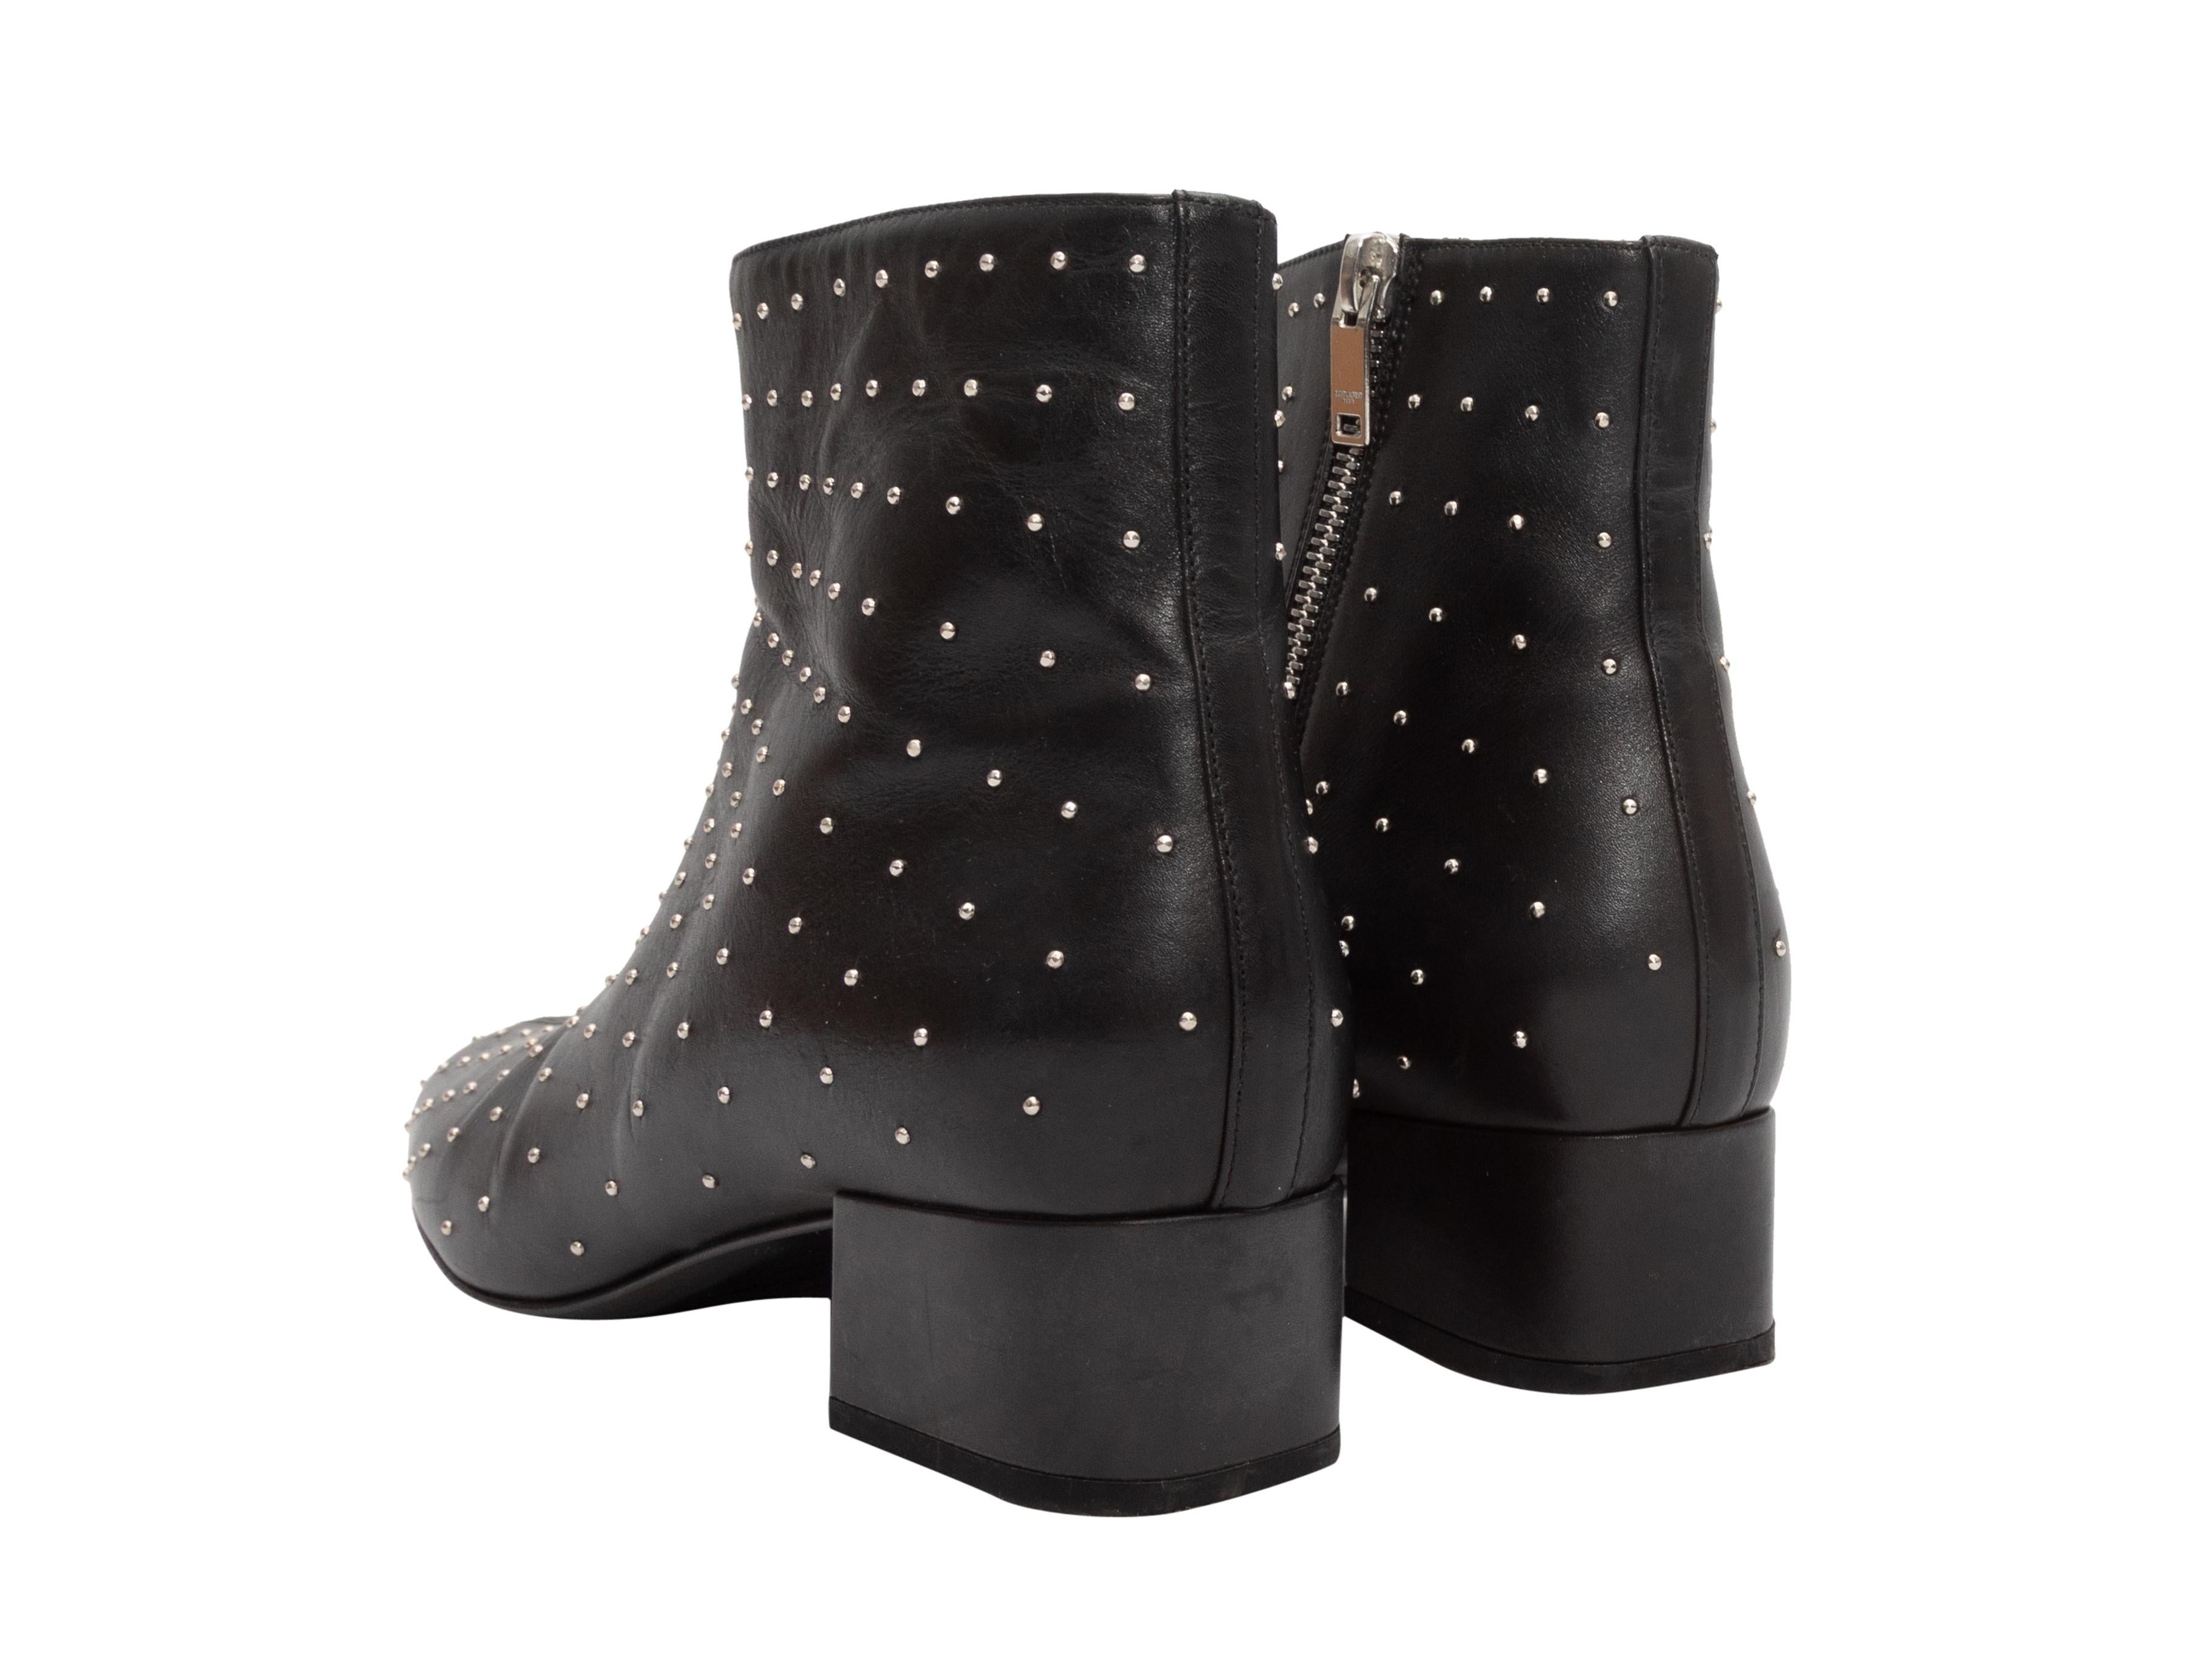 Black Saint Laurent Studded Leather Ankle Boots size 38 In Excellent Condition For Sale In New York, NY